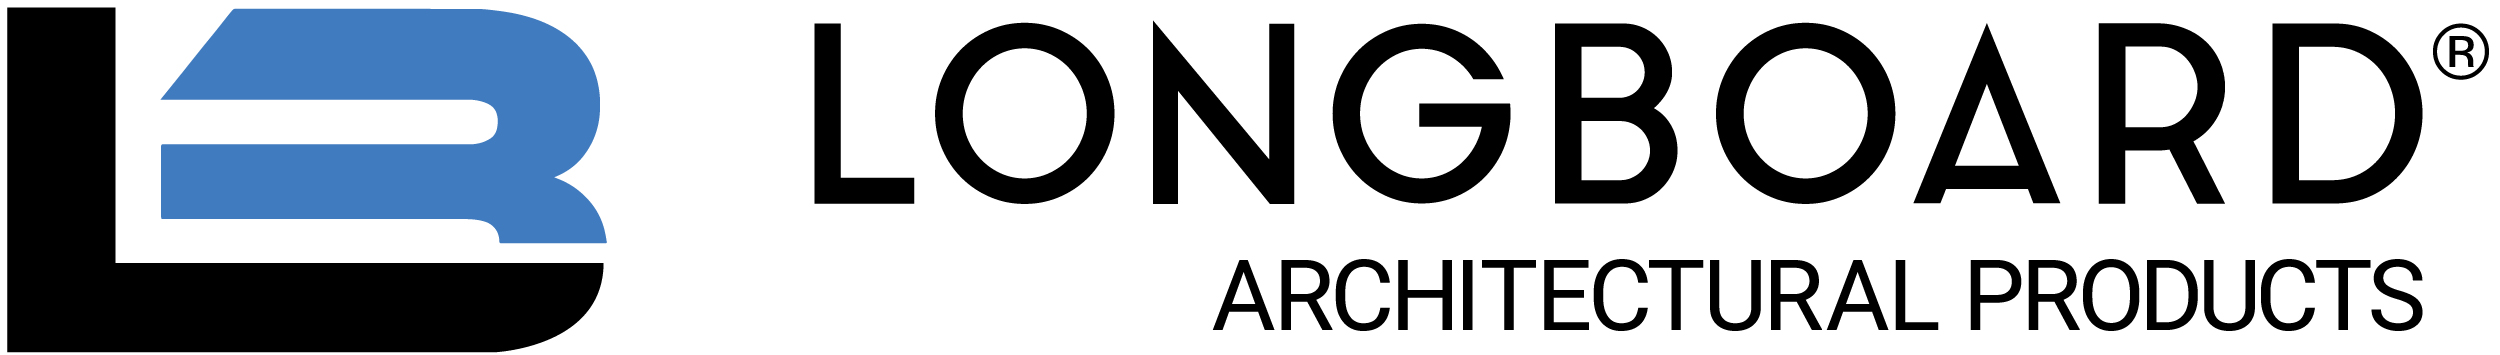 Longboard Architectural Products Logo